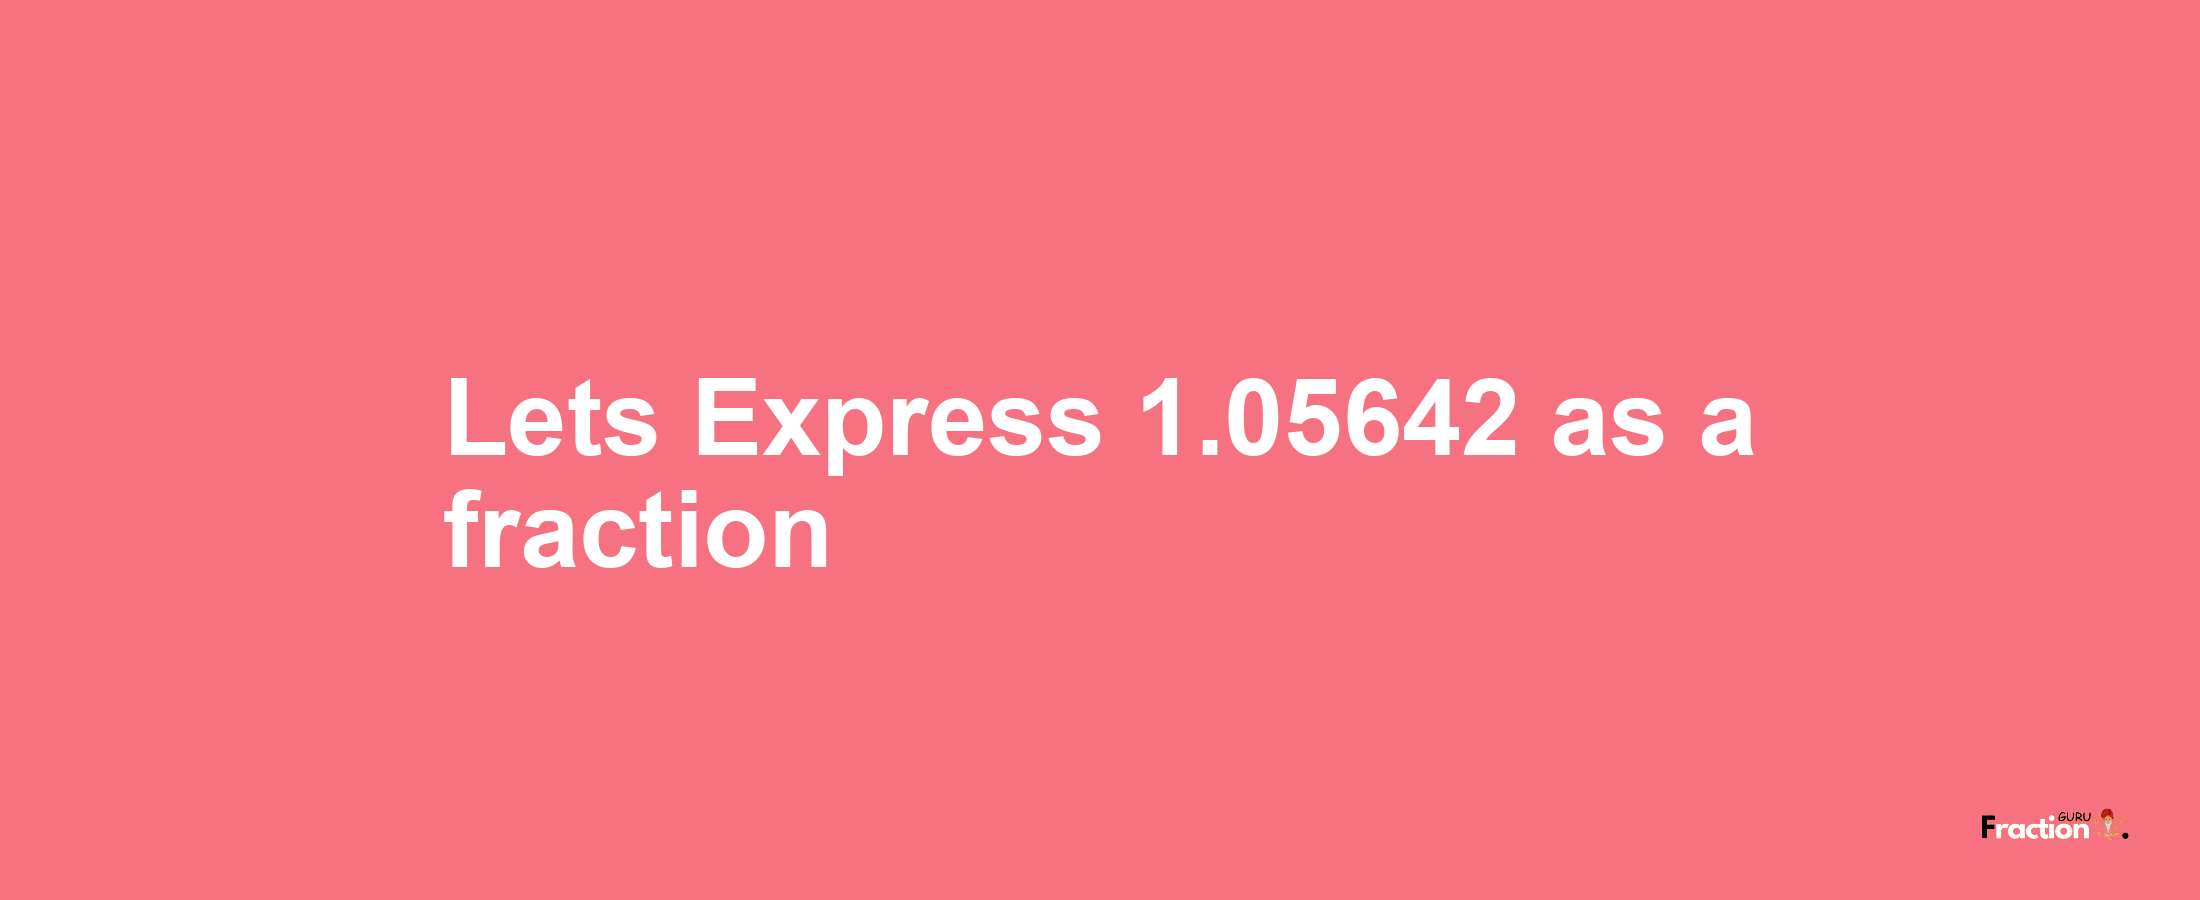 Lets Express 1.05642 as afraction